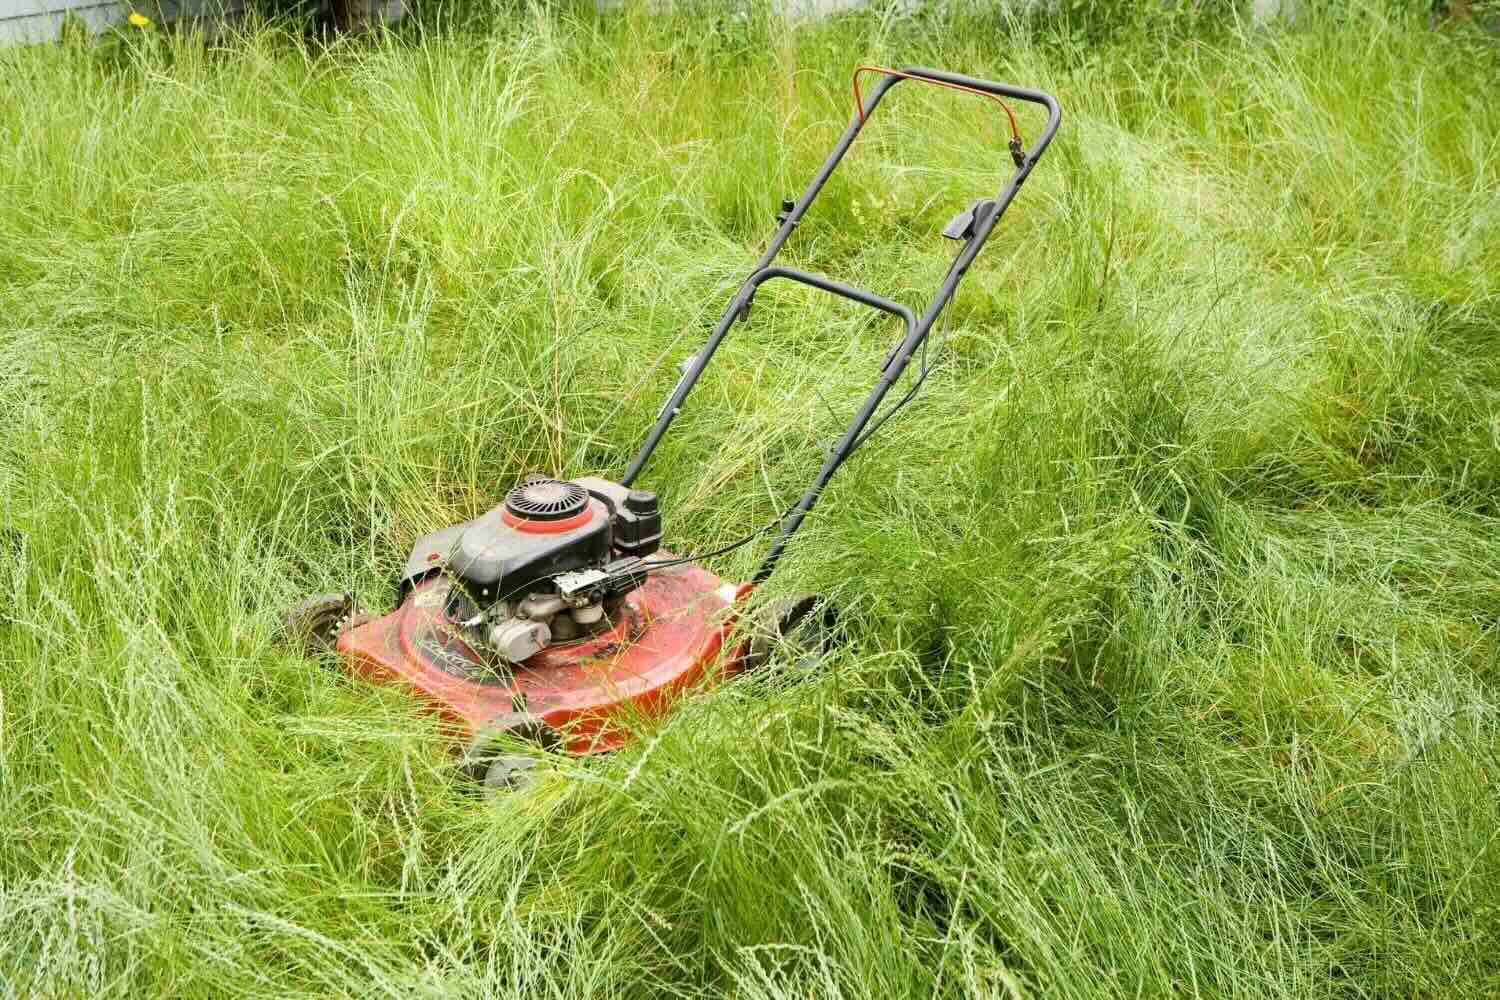 How To Mow Very Tall Grass